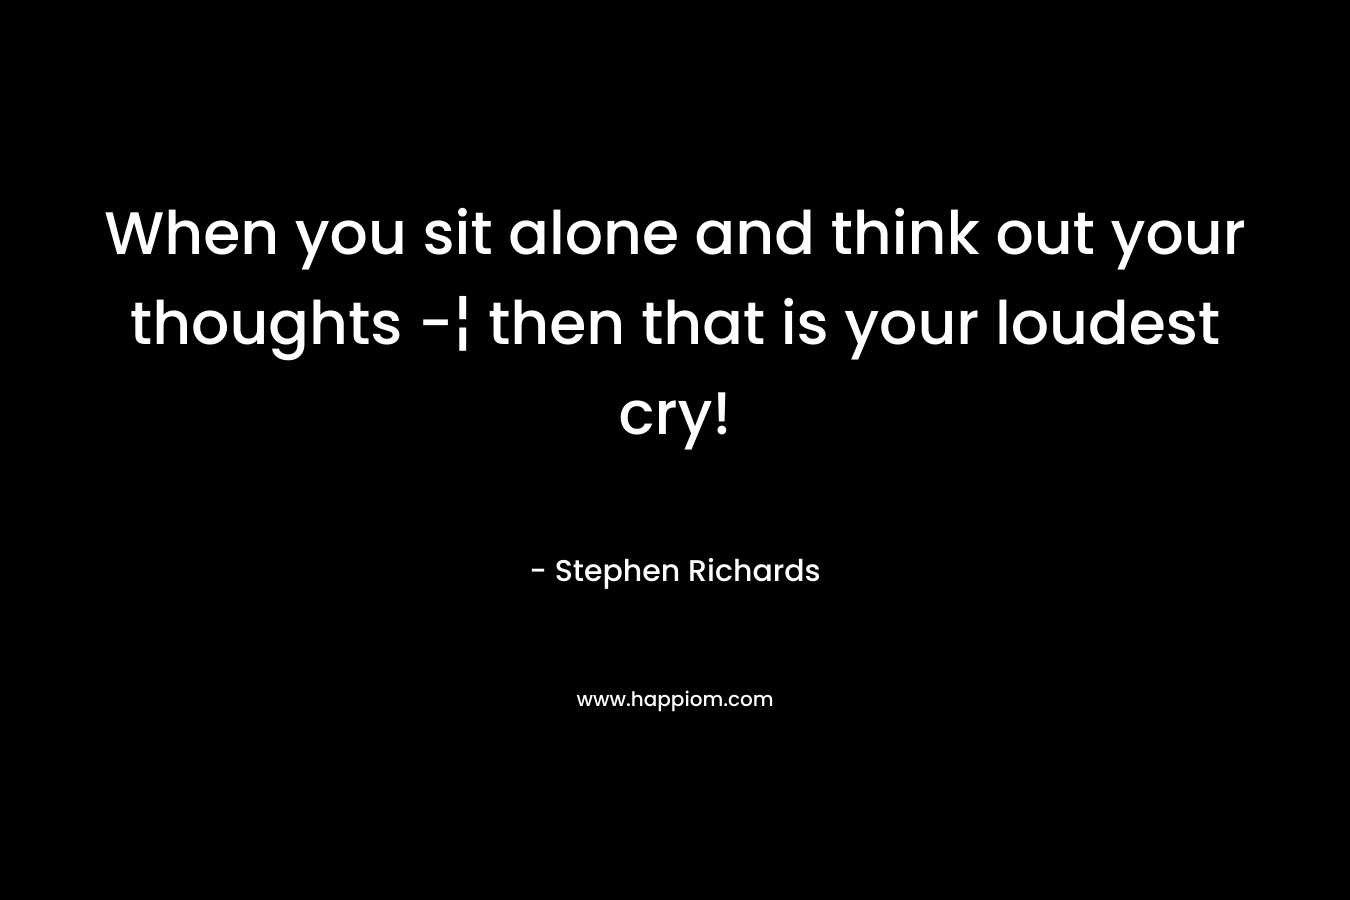 When you sit alone and think out your thoughts -¦ then that is your loudest cry!